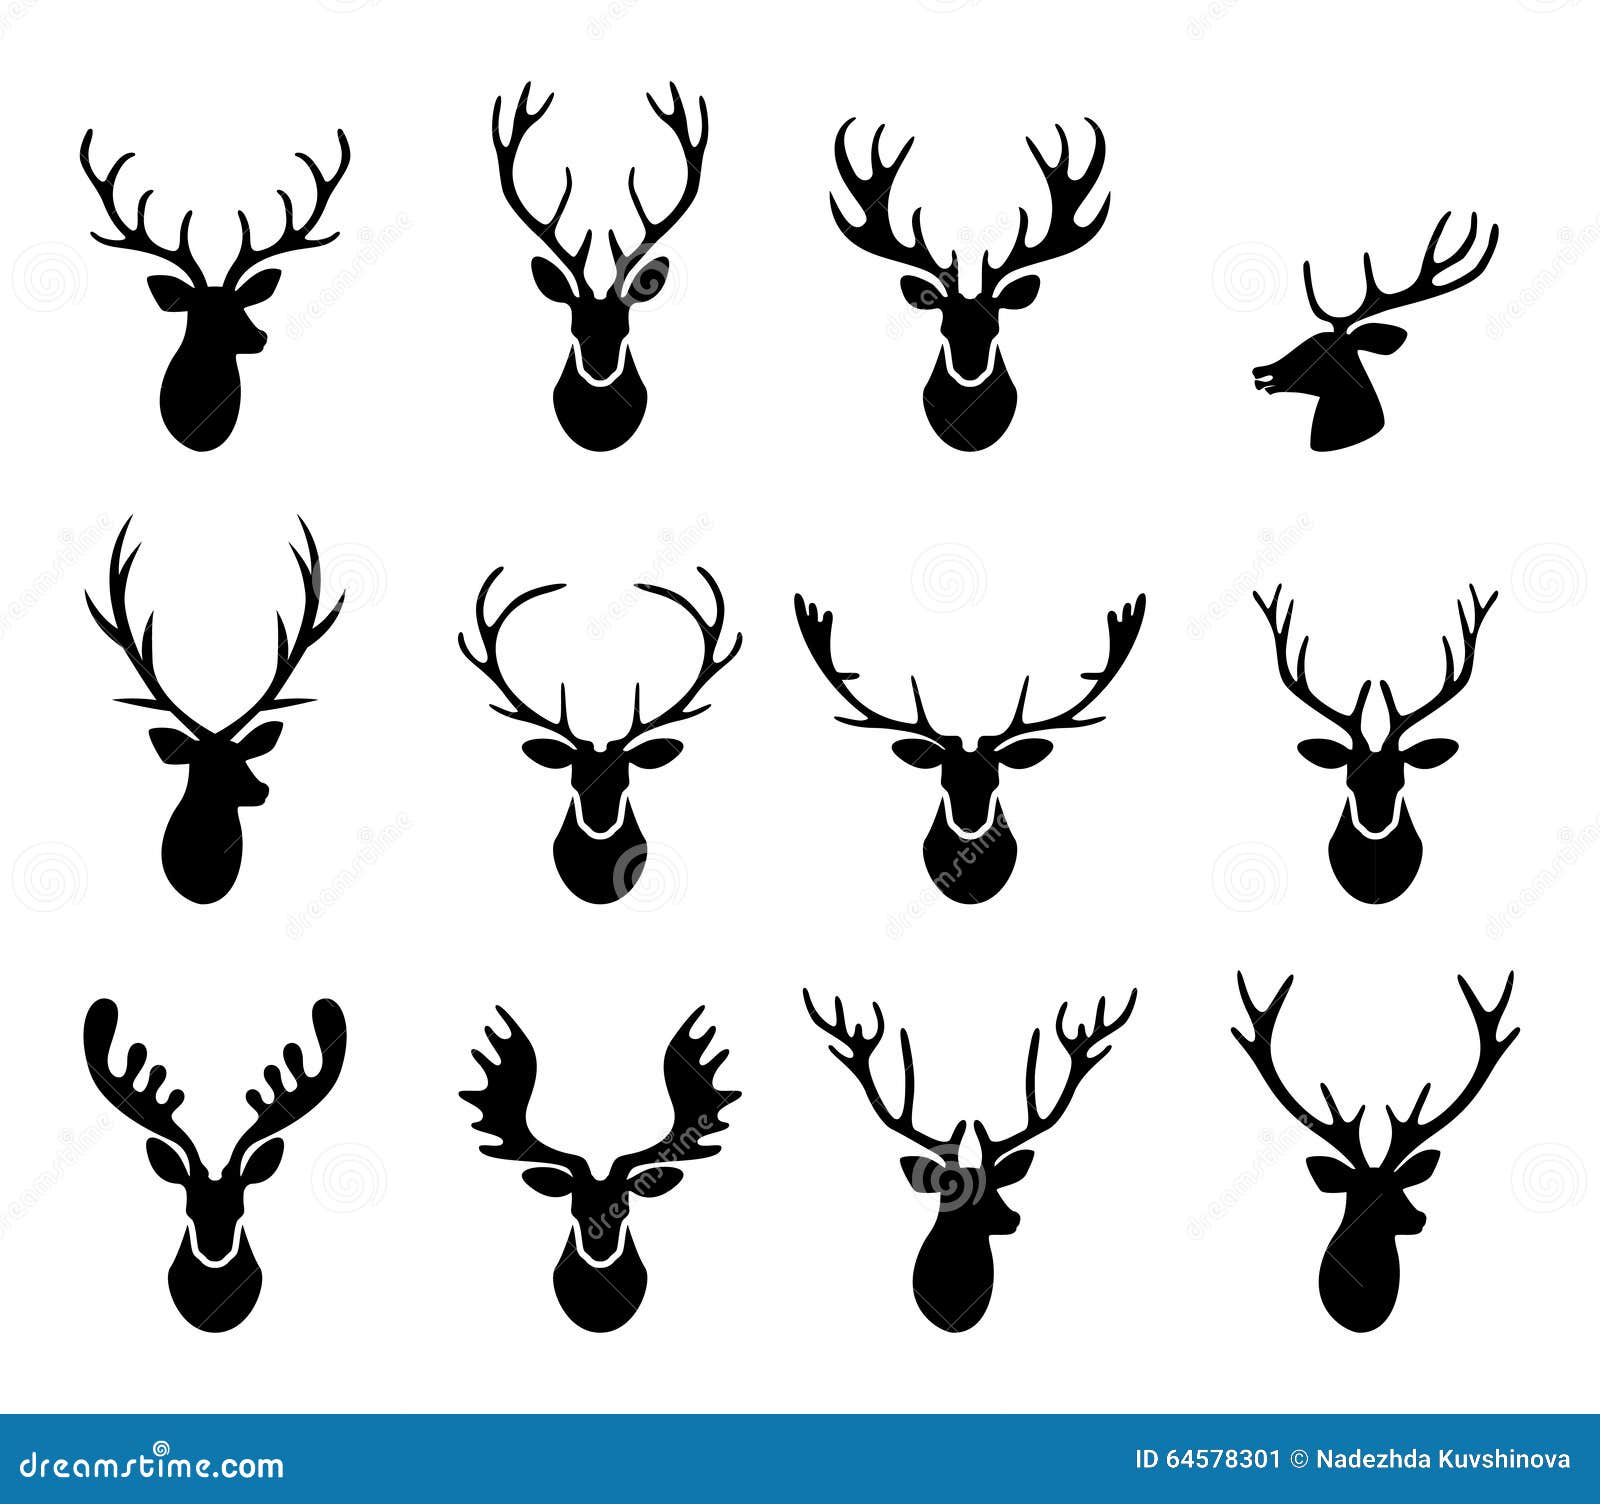 Download Black Silhouettes Of Different Deer Horns, Vector Stock ...